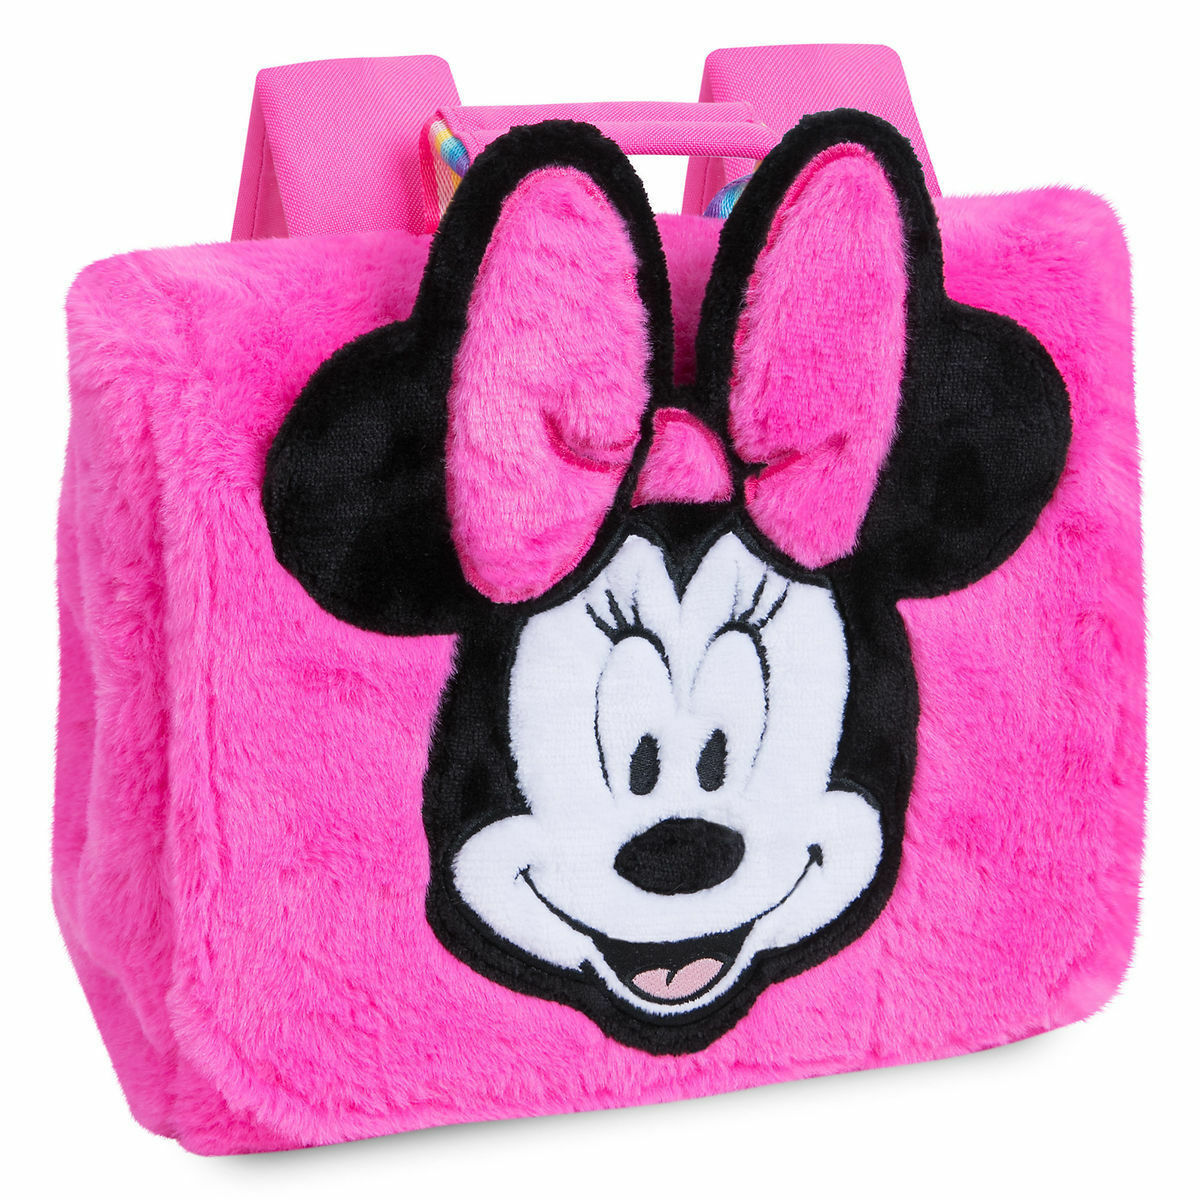 Disney Store Minnie Mouse Fuzzy Pink Backpack School Bag Cute Girls Accessory